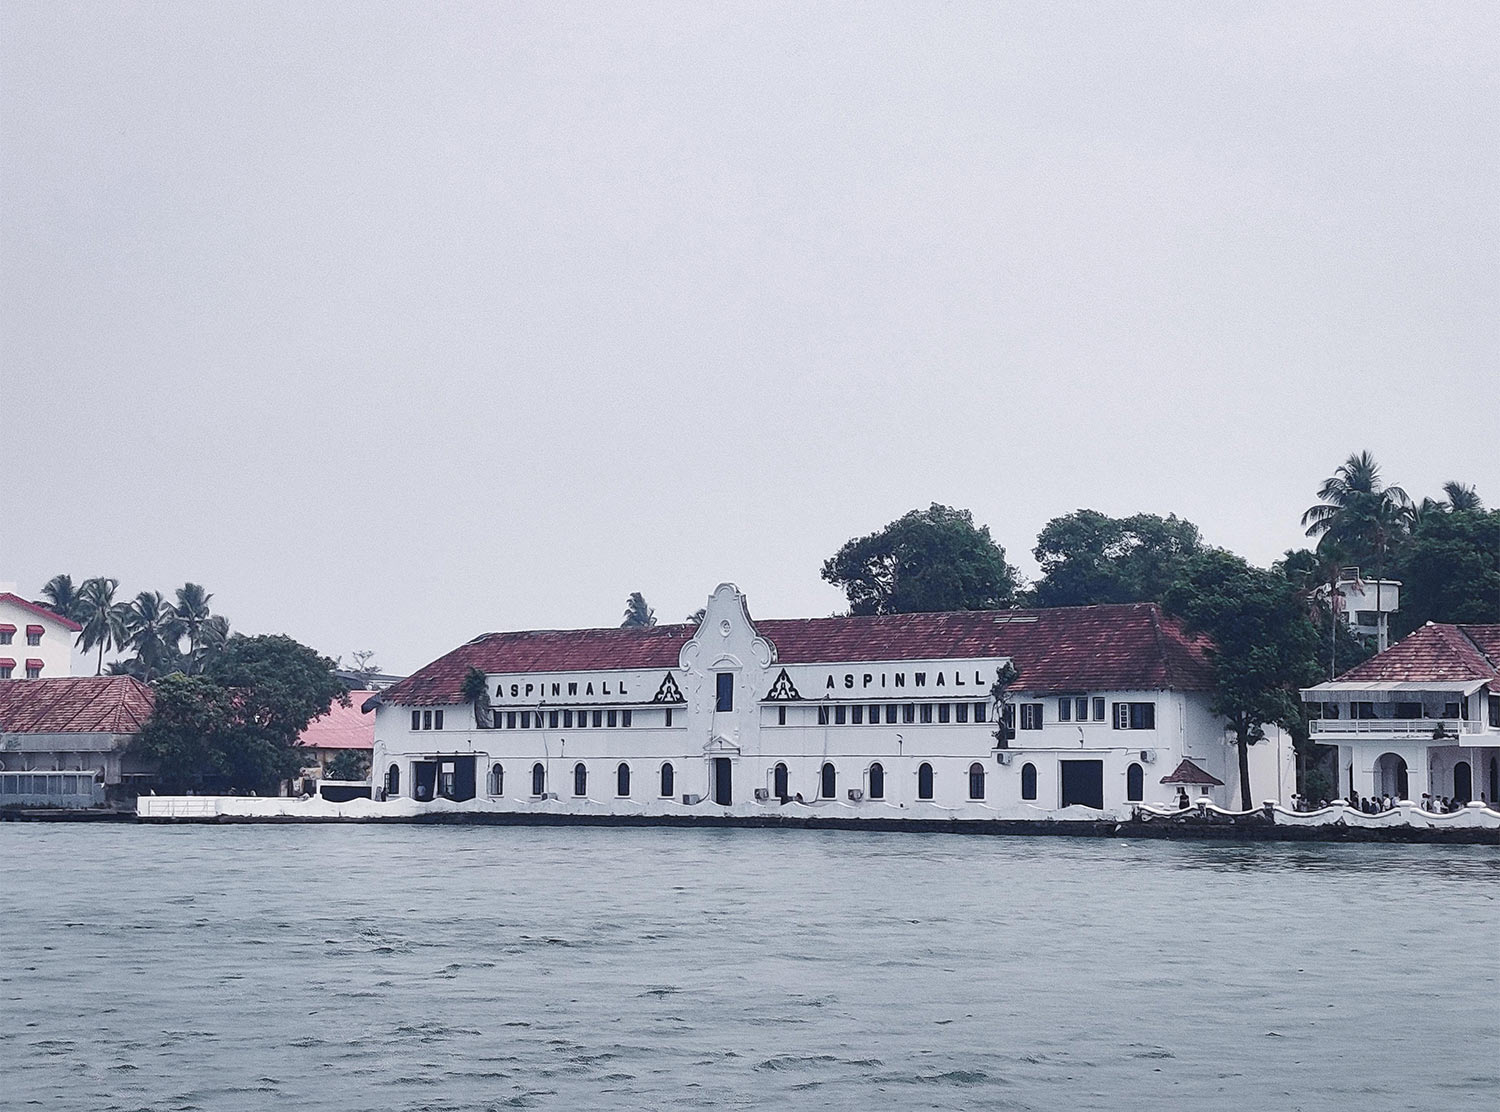 Fort Kochi Aspinwall House is the main exhibit space in Fort Kochi. Photo by Supreeth Suresh